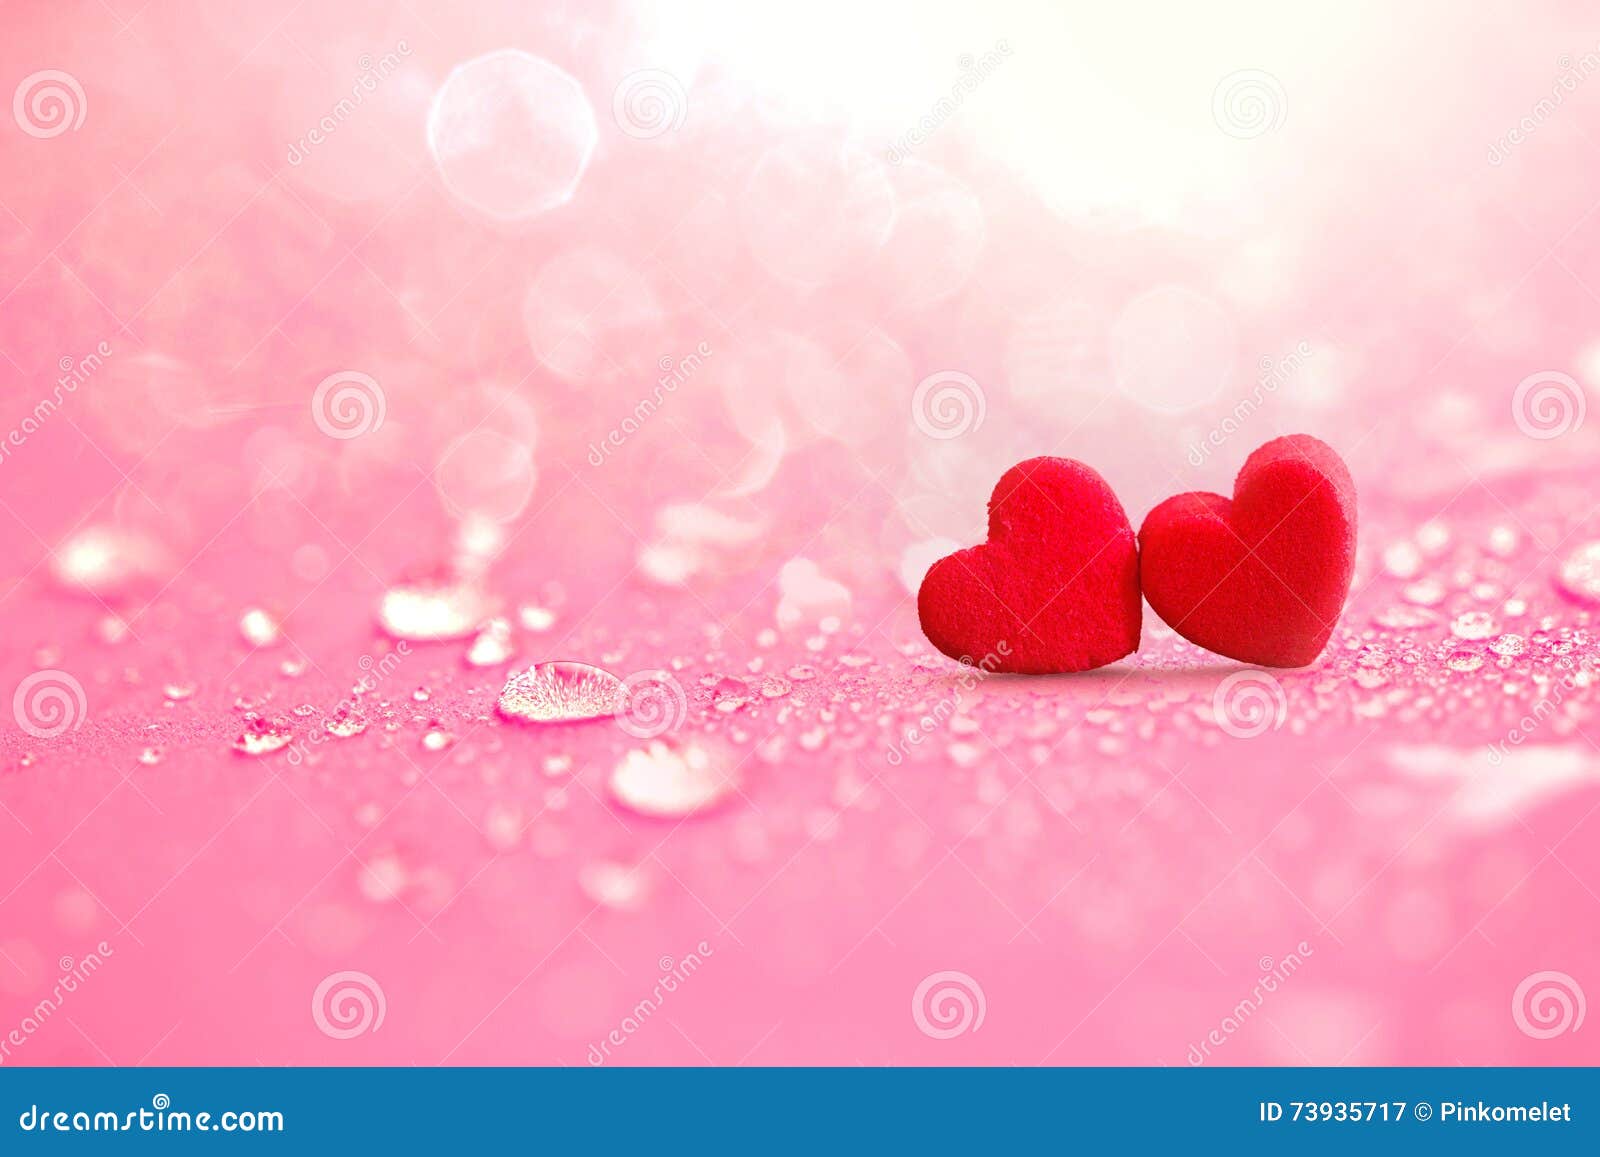 close up the red heart s with rain water drops on pink sponge surface as love romance abstract background